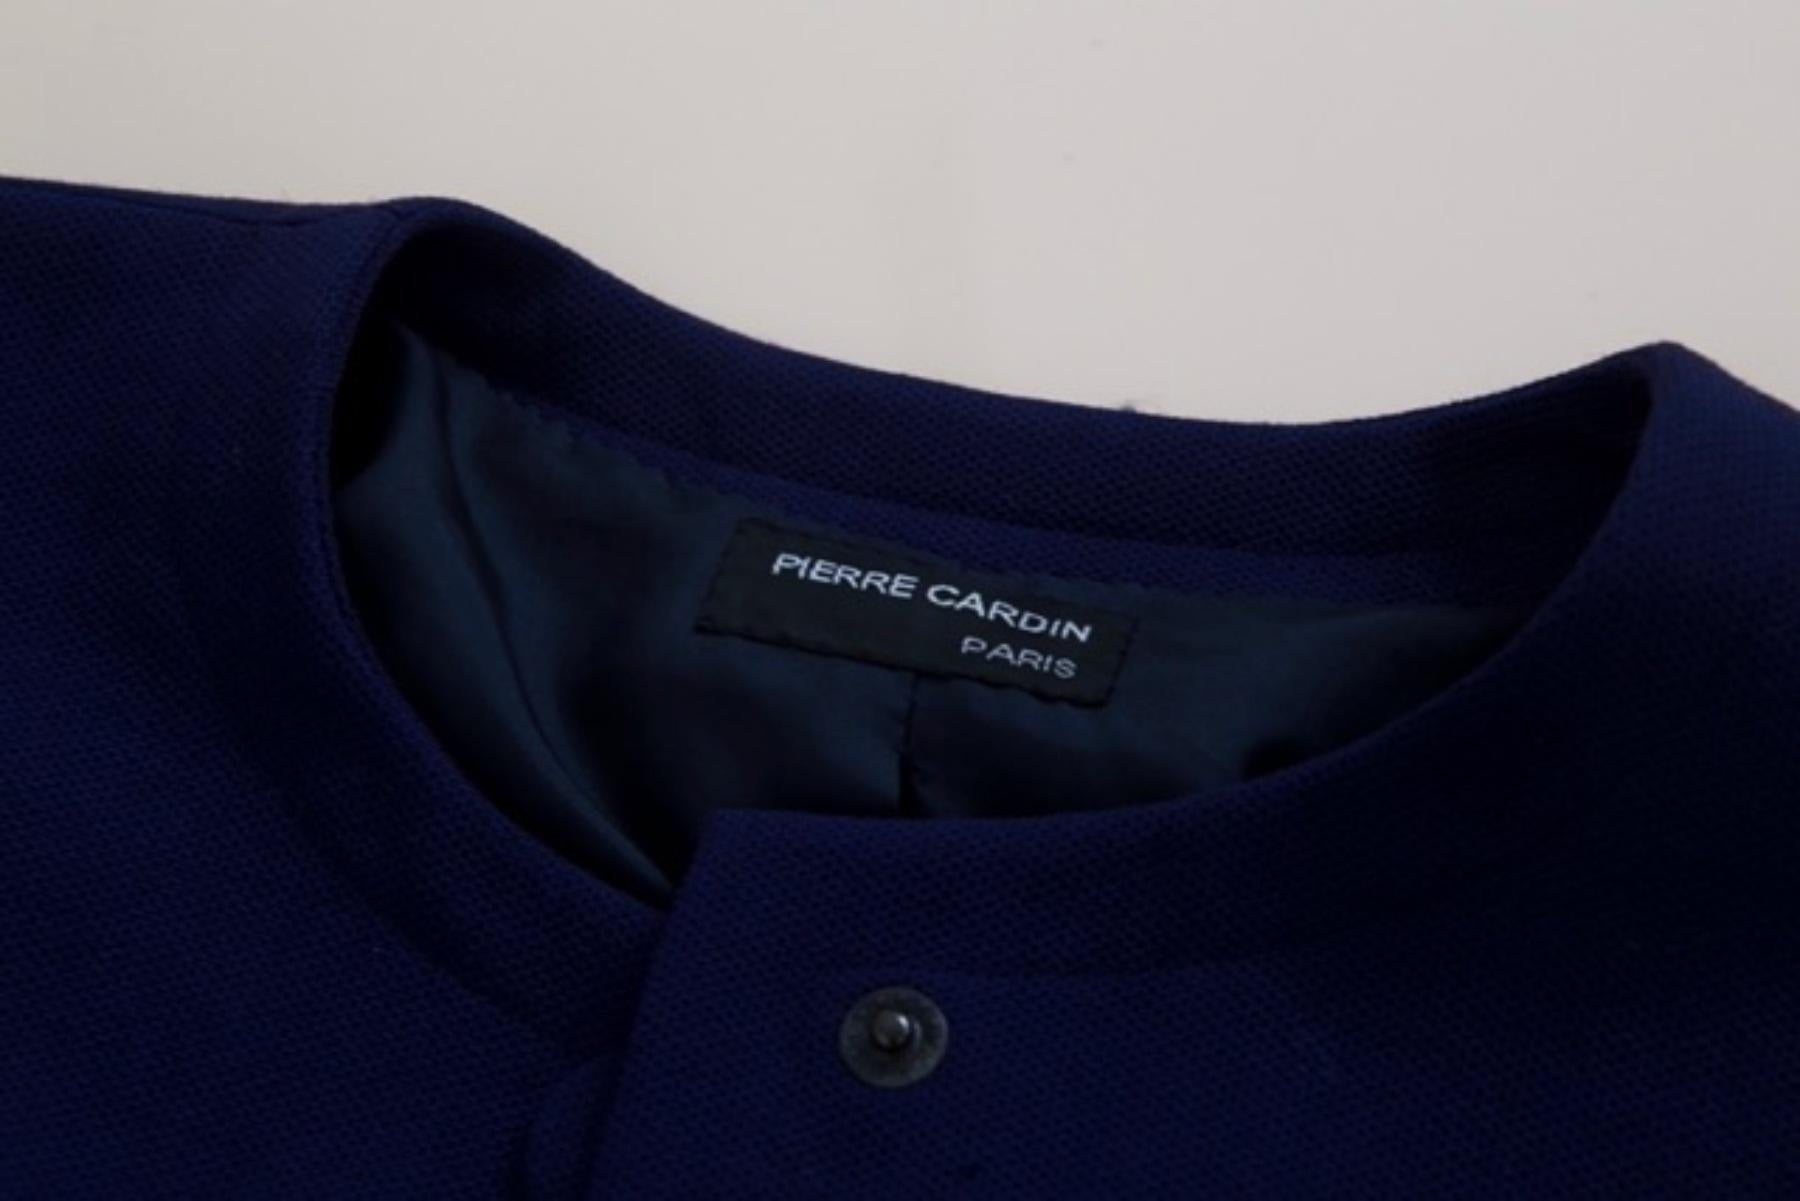 Glamorous vintage blazer designed by Pierre Cardin in the 1980s, made in France. ORIGINAL LABEL.
The blazer is completely made of dark blue cotton, with long, wide sleeves that allow good arm movement.
The collar has the classic closed collar cut,